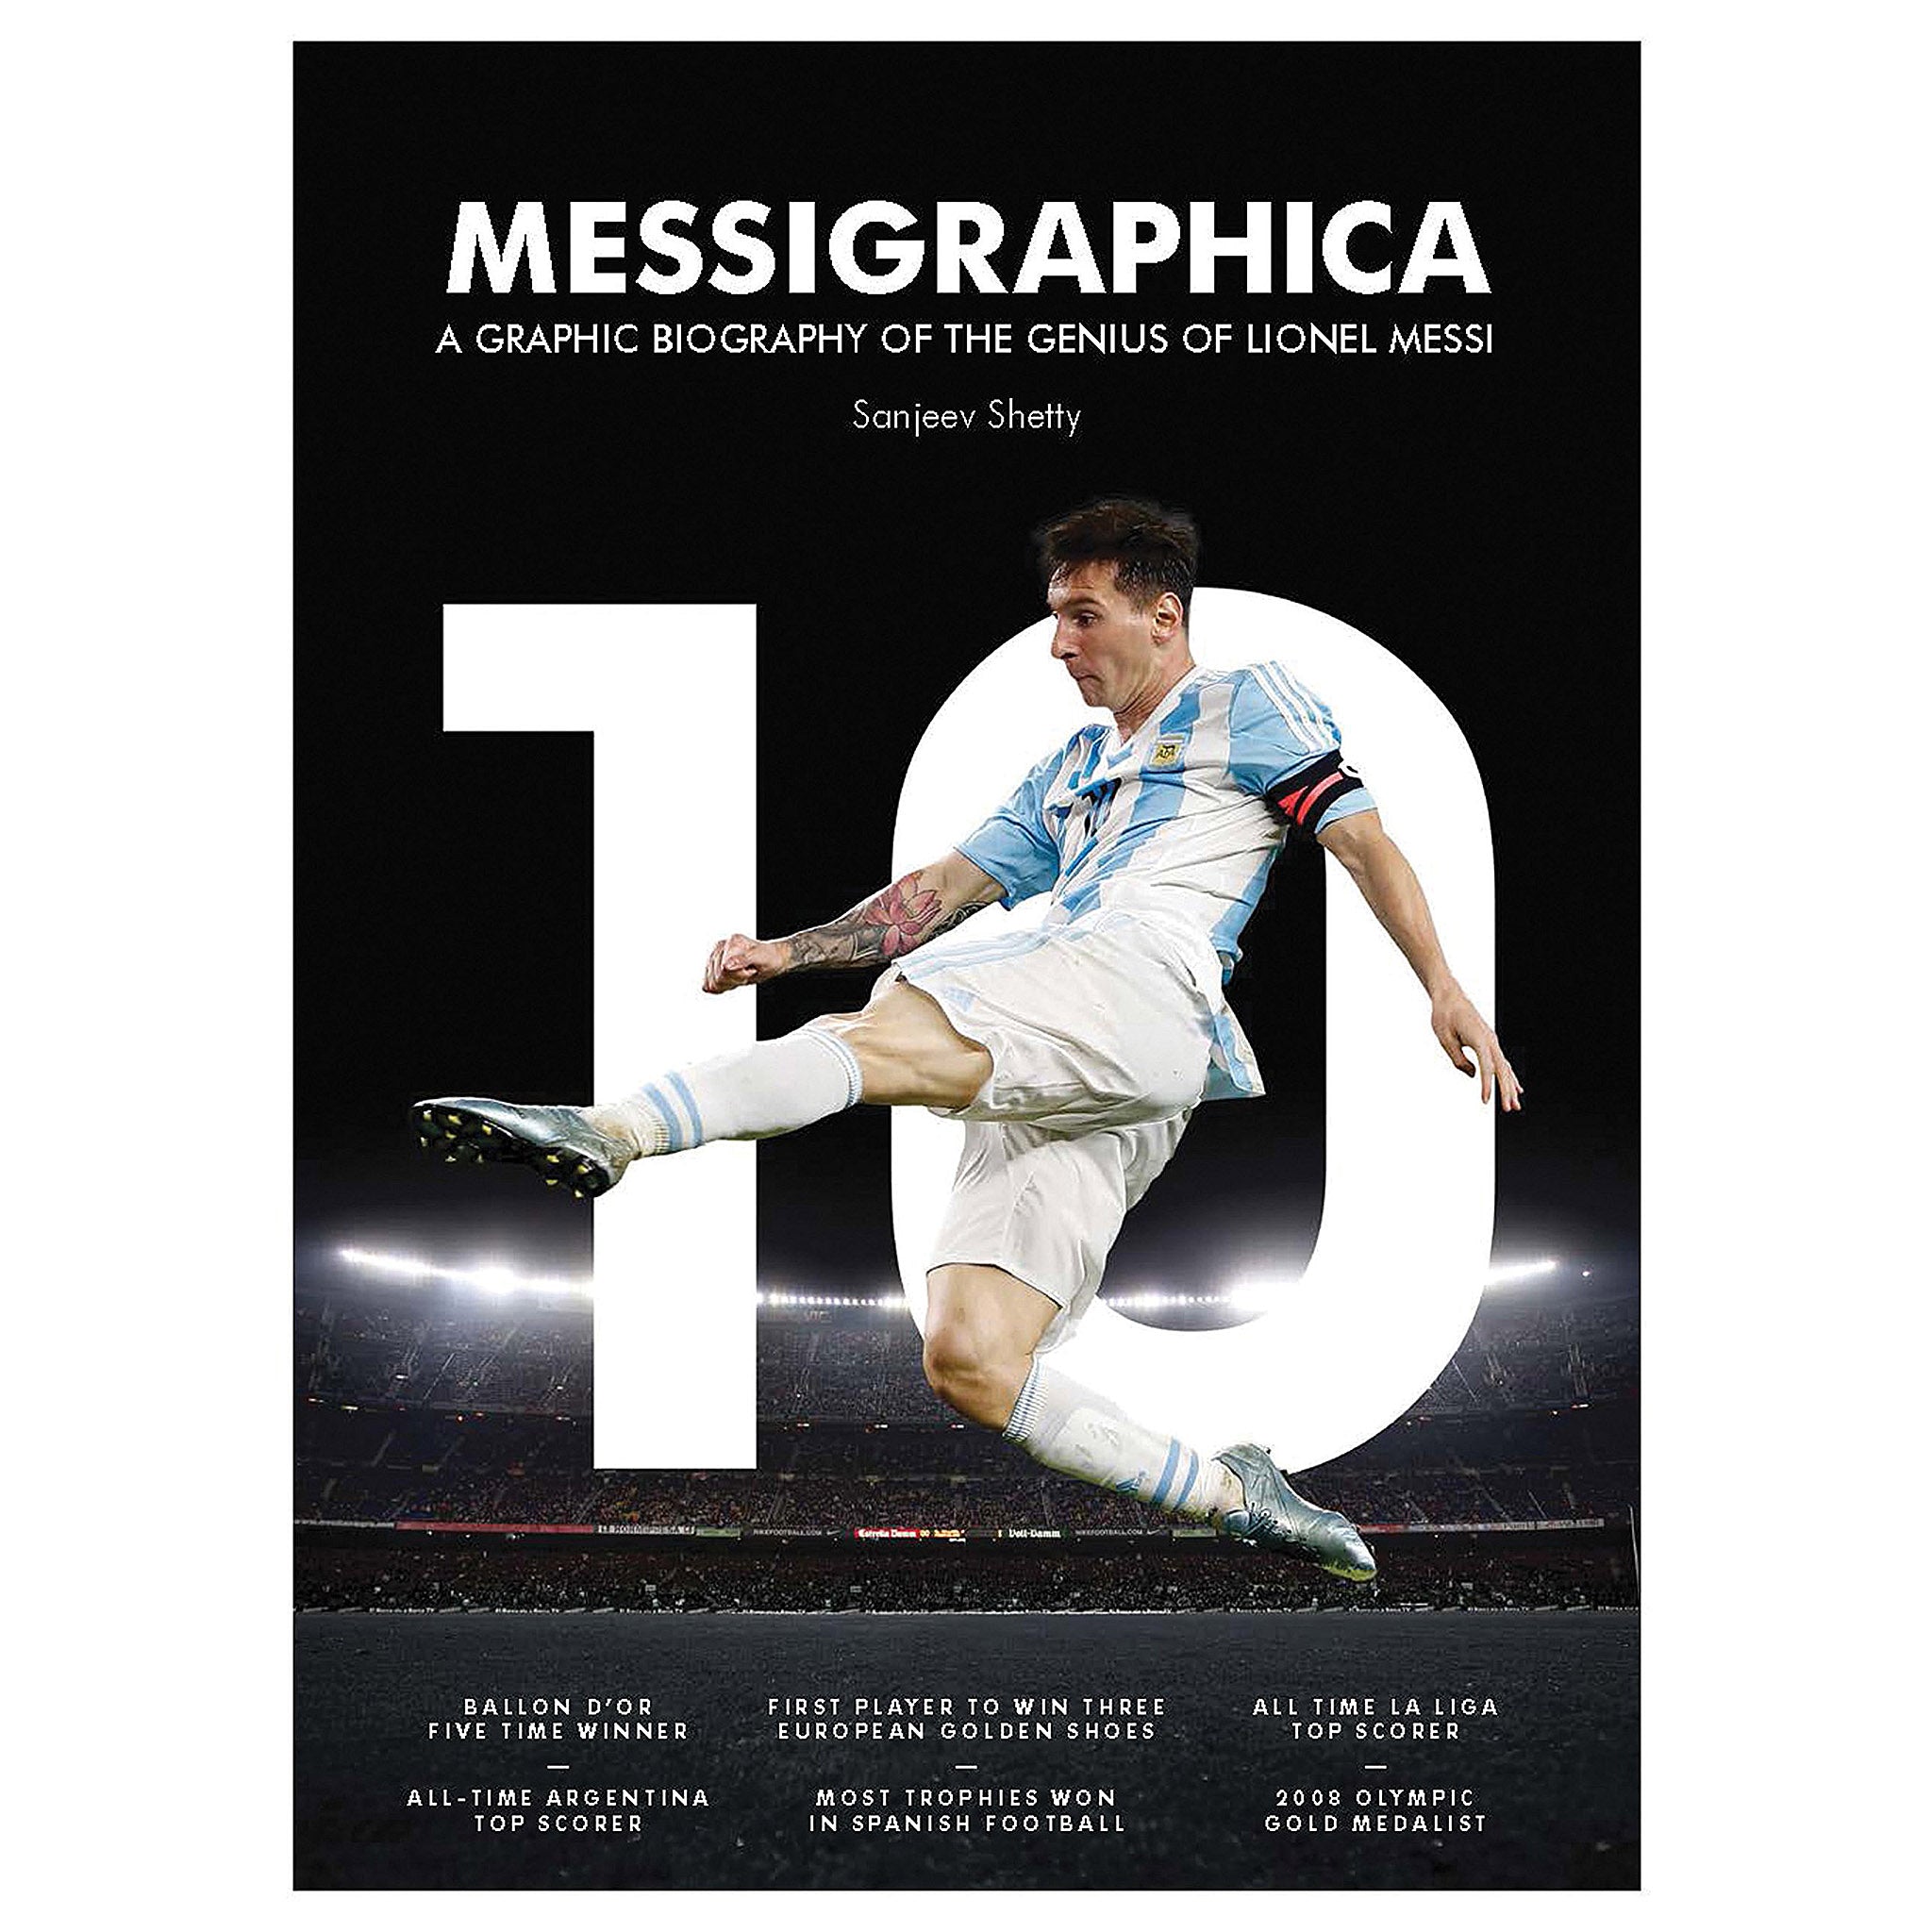 Messigraphica – A Graphic Biography of the Genius of Lionel Messi